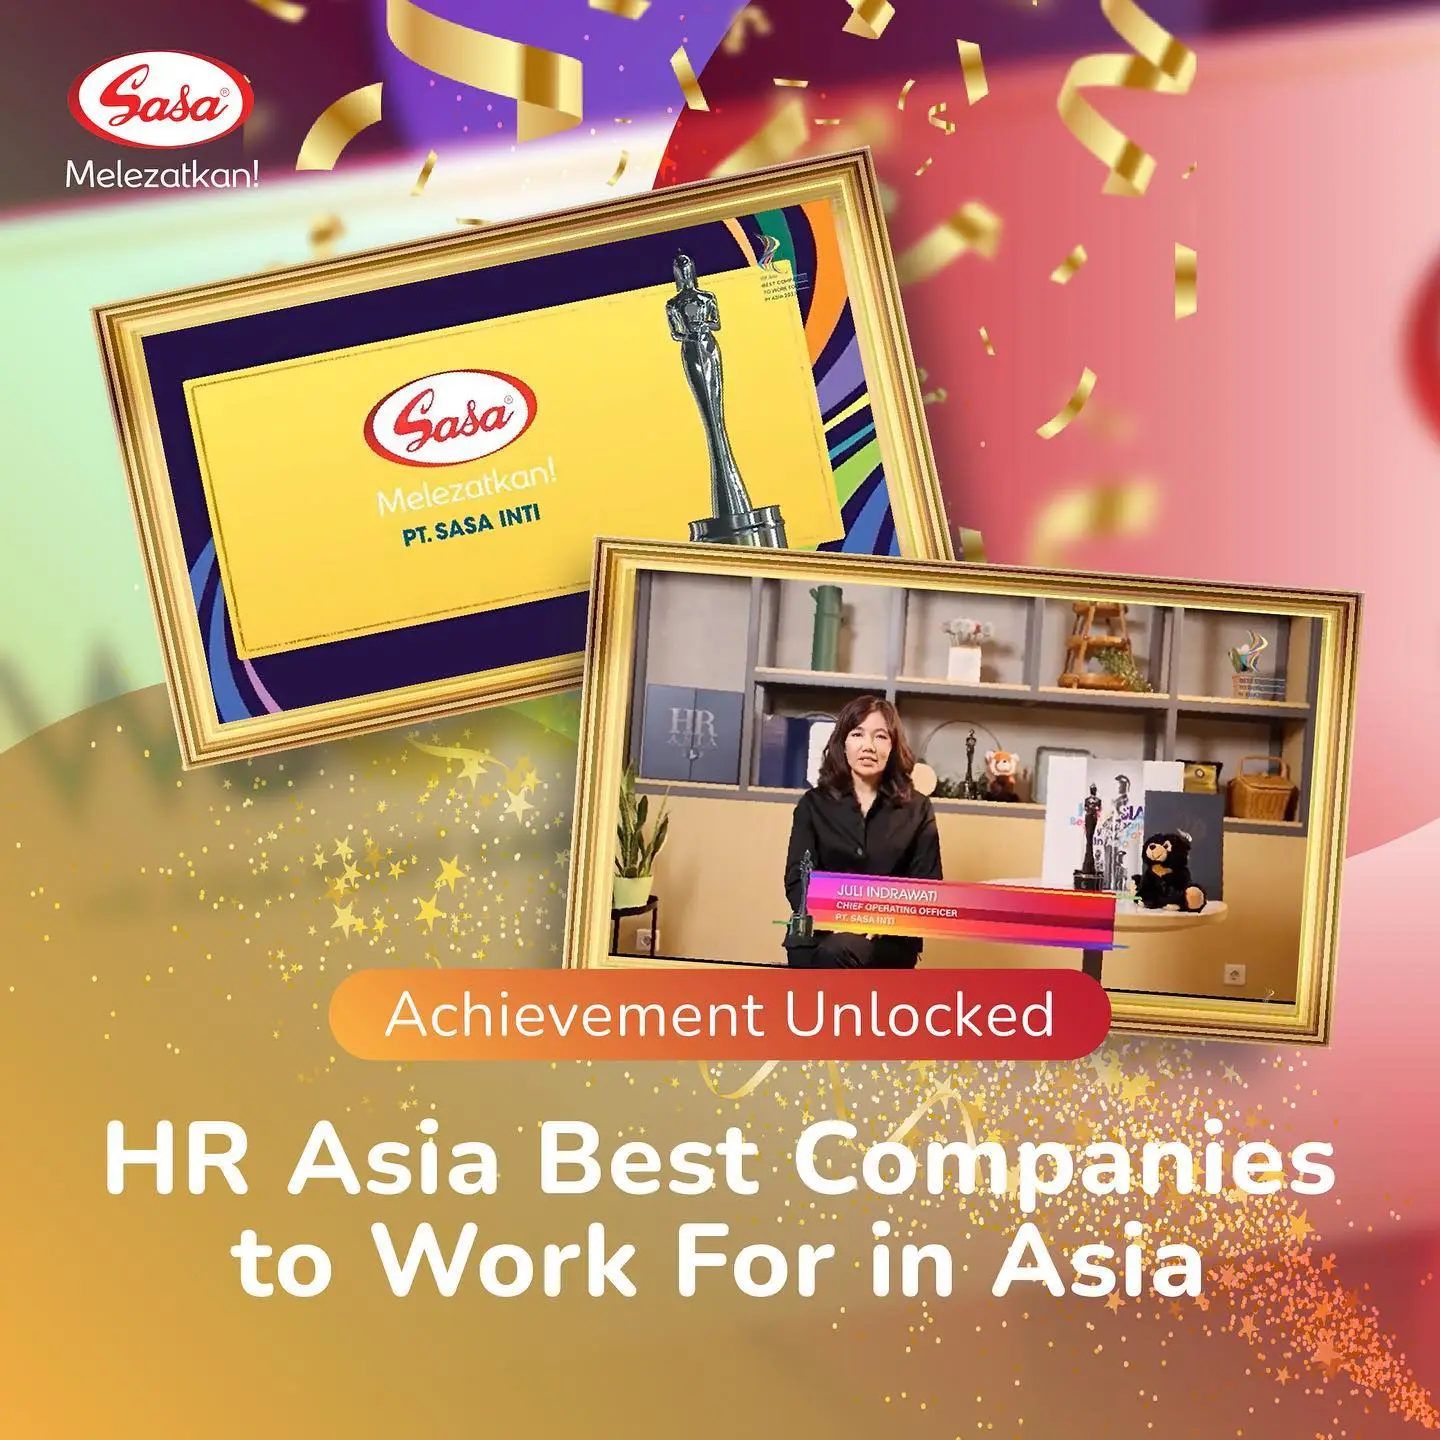 HR ASIA BEST COMPANIES TO WORK FOR IN ASIA